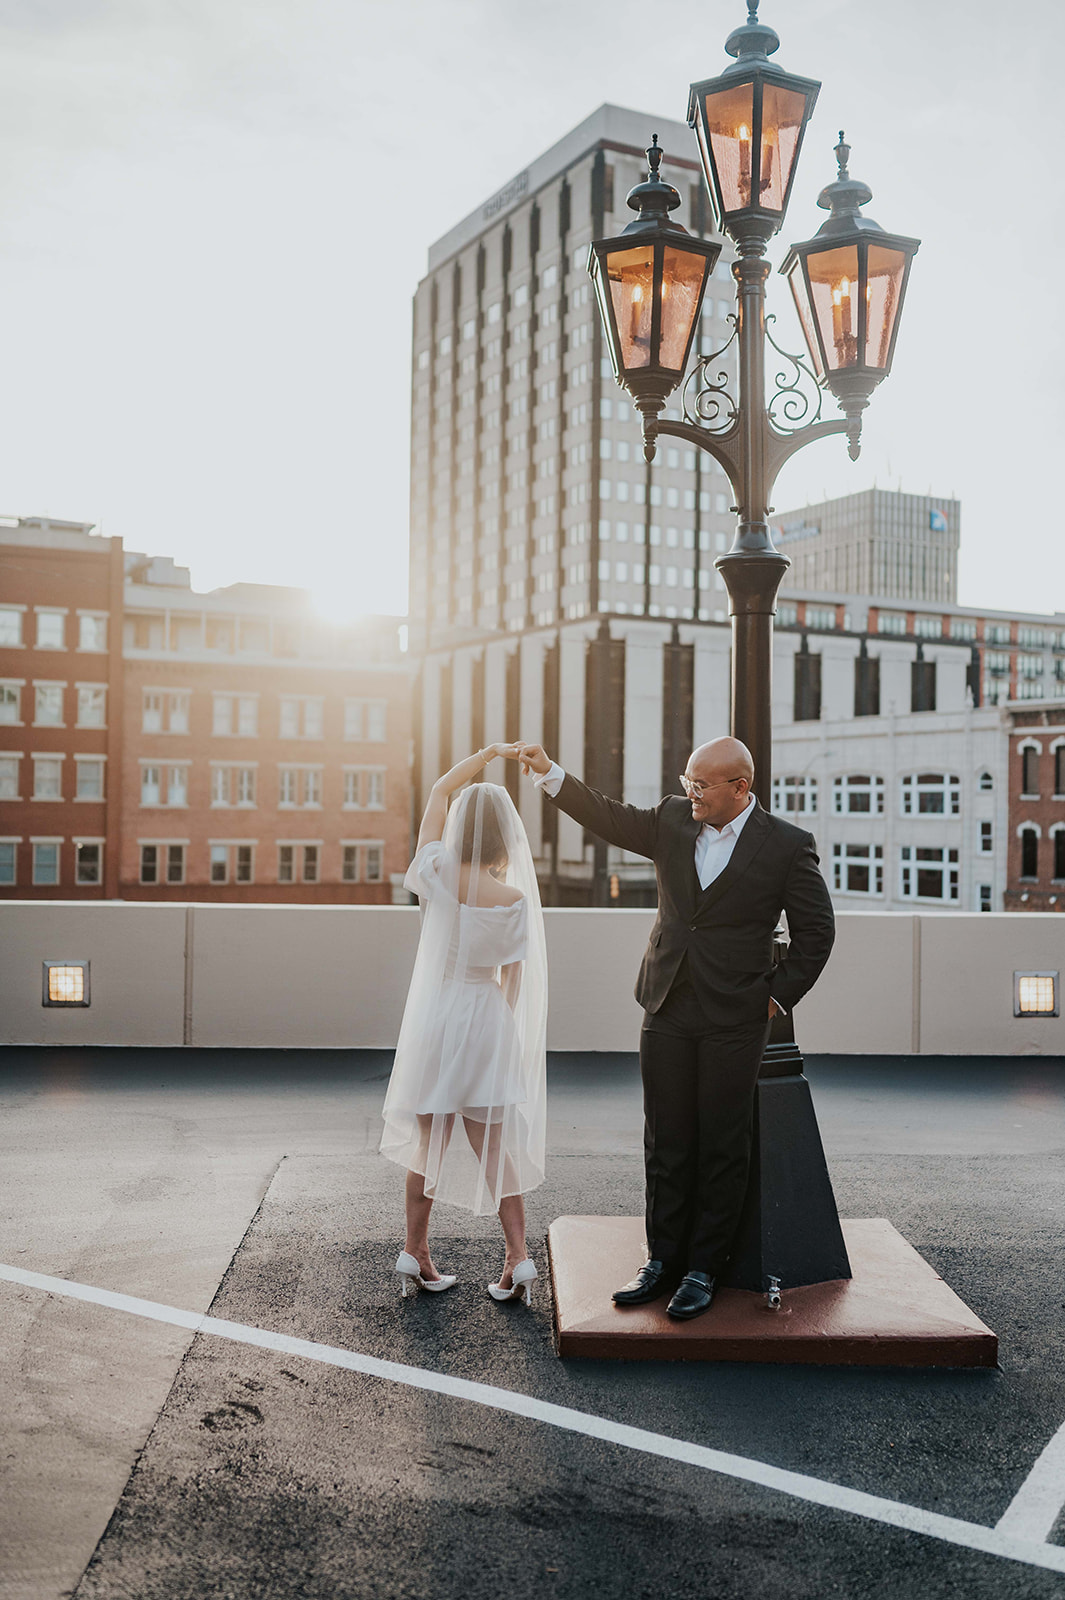 Downtown Engagement Photographs. Man is twirling his fiancé while they dance on a parking rooftop. They are demonstrating an example of what to wear for your engagement photoshoot. Man is wearing a black suit and woman is wearing a white dress and heels. 